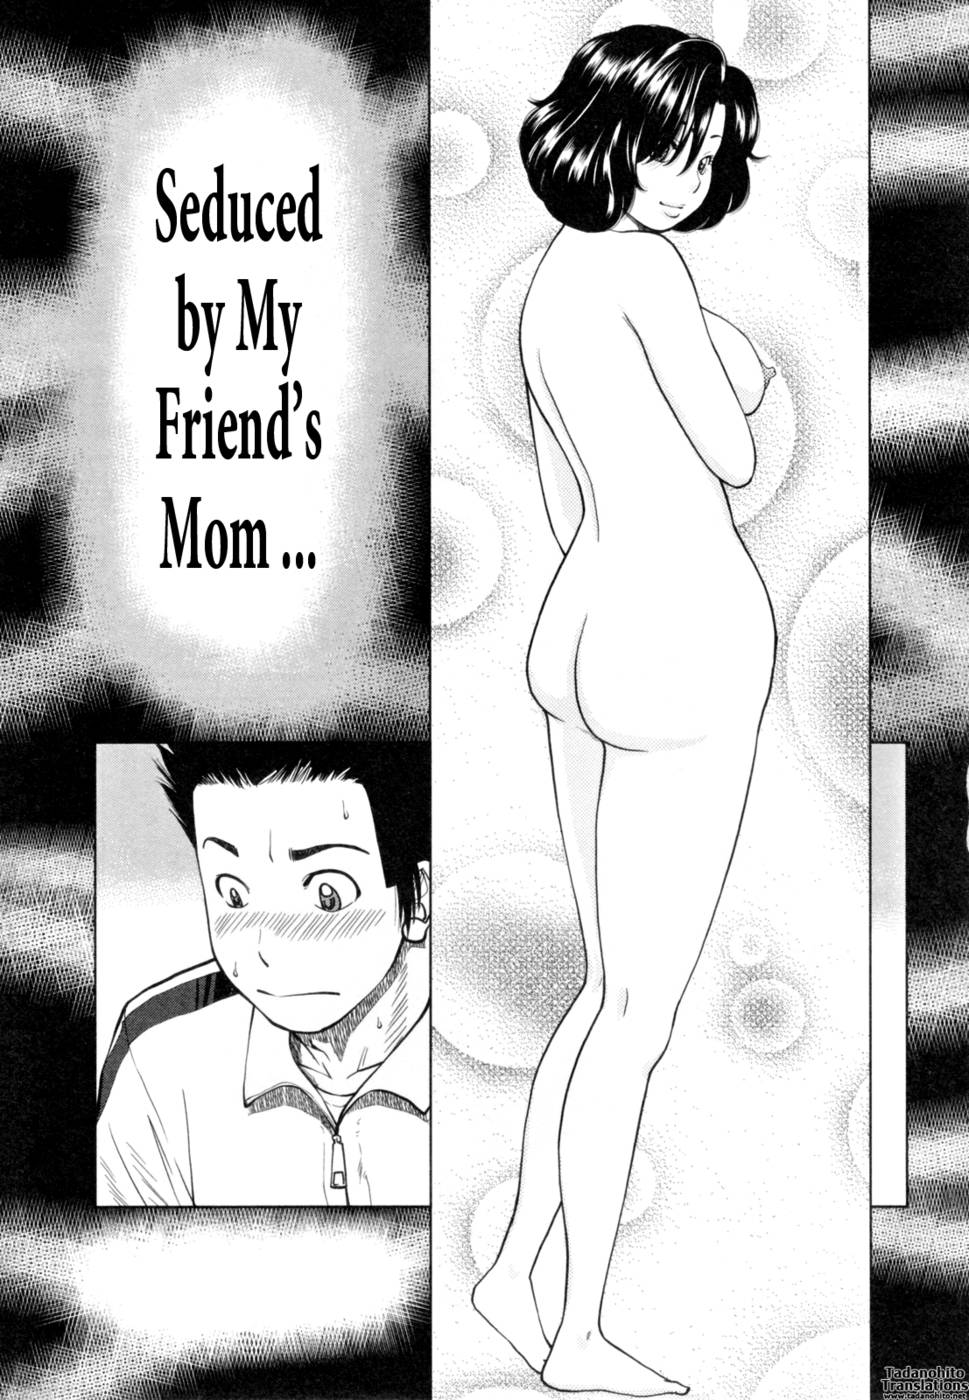 Chapter 8-Seduced By My Friends Mom - 32 Year Old Unsatisfied Wife pic